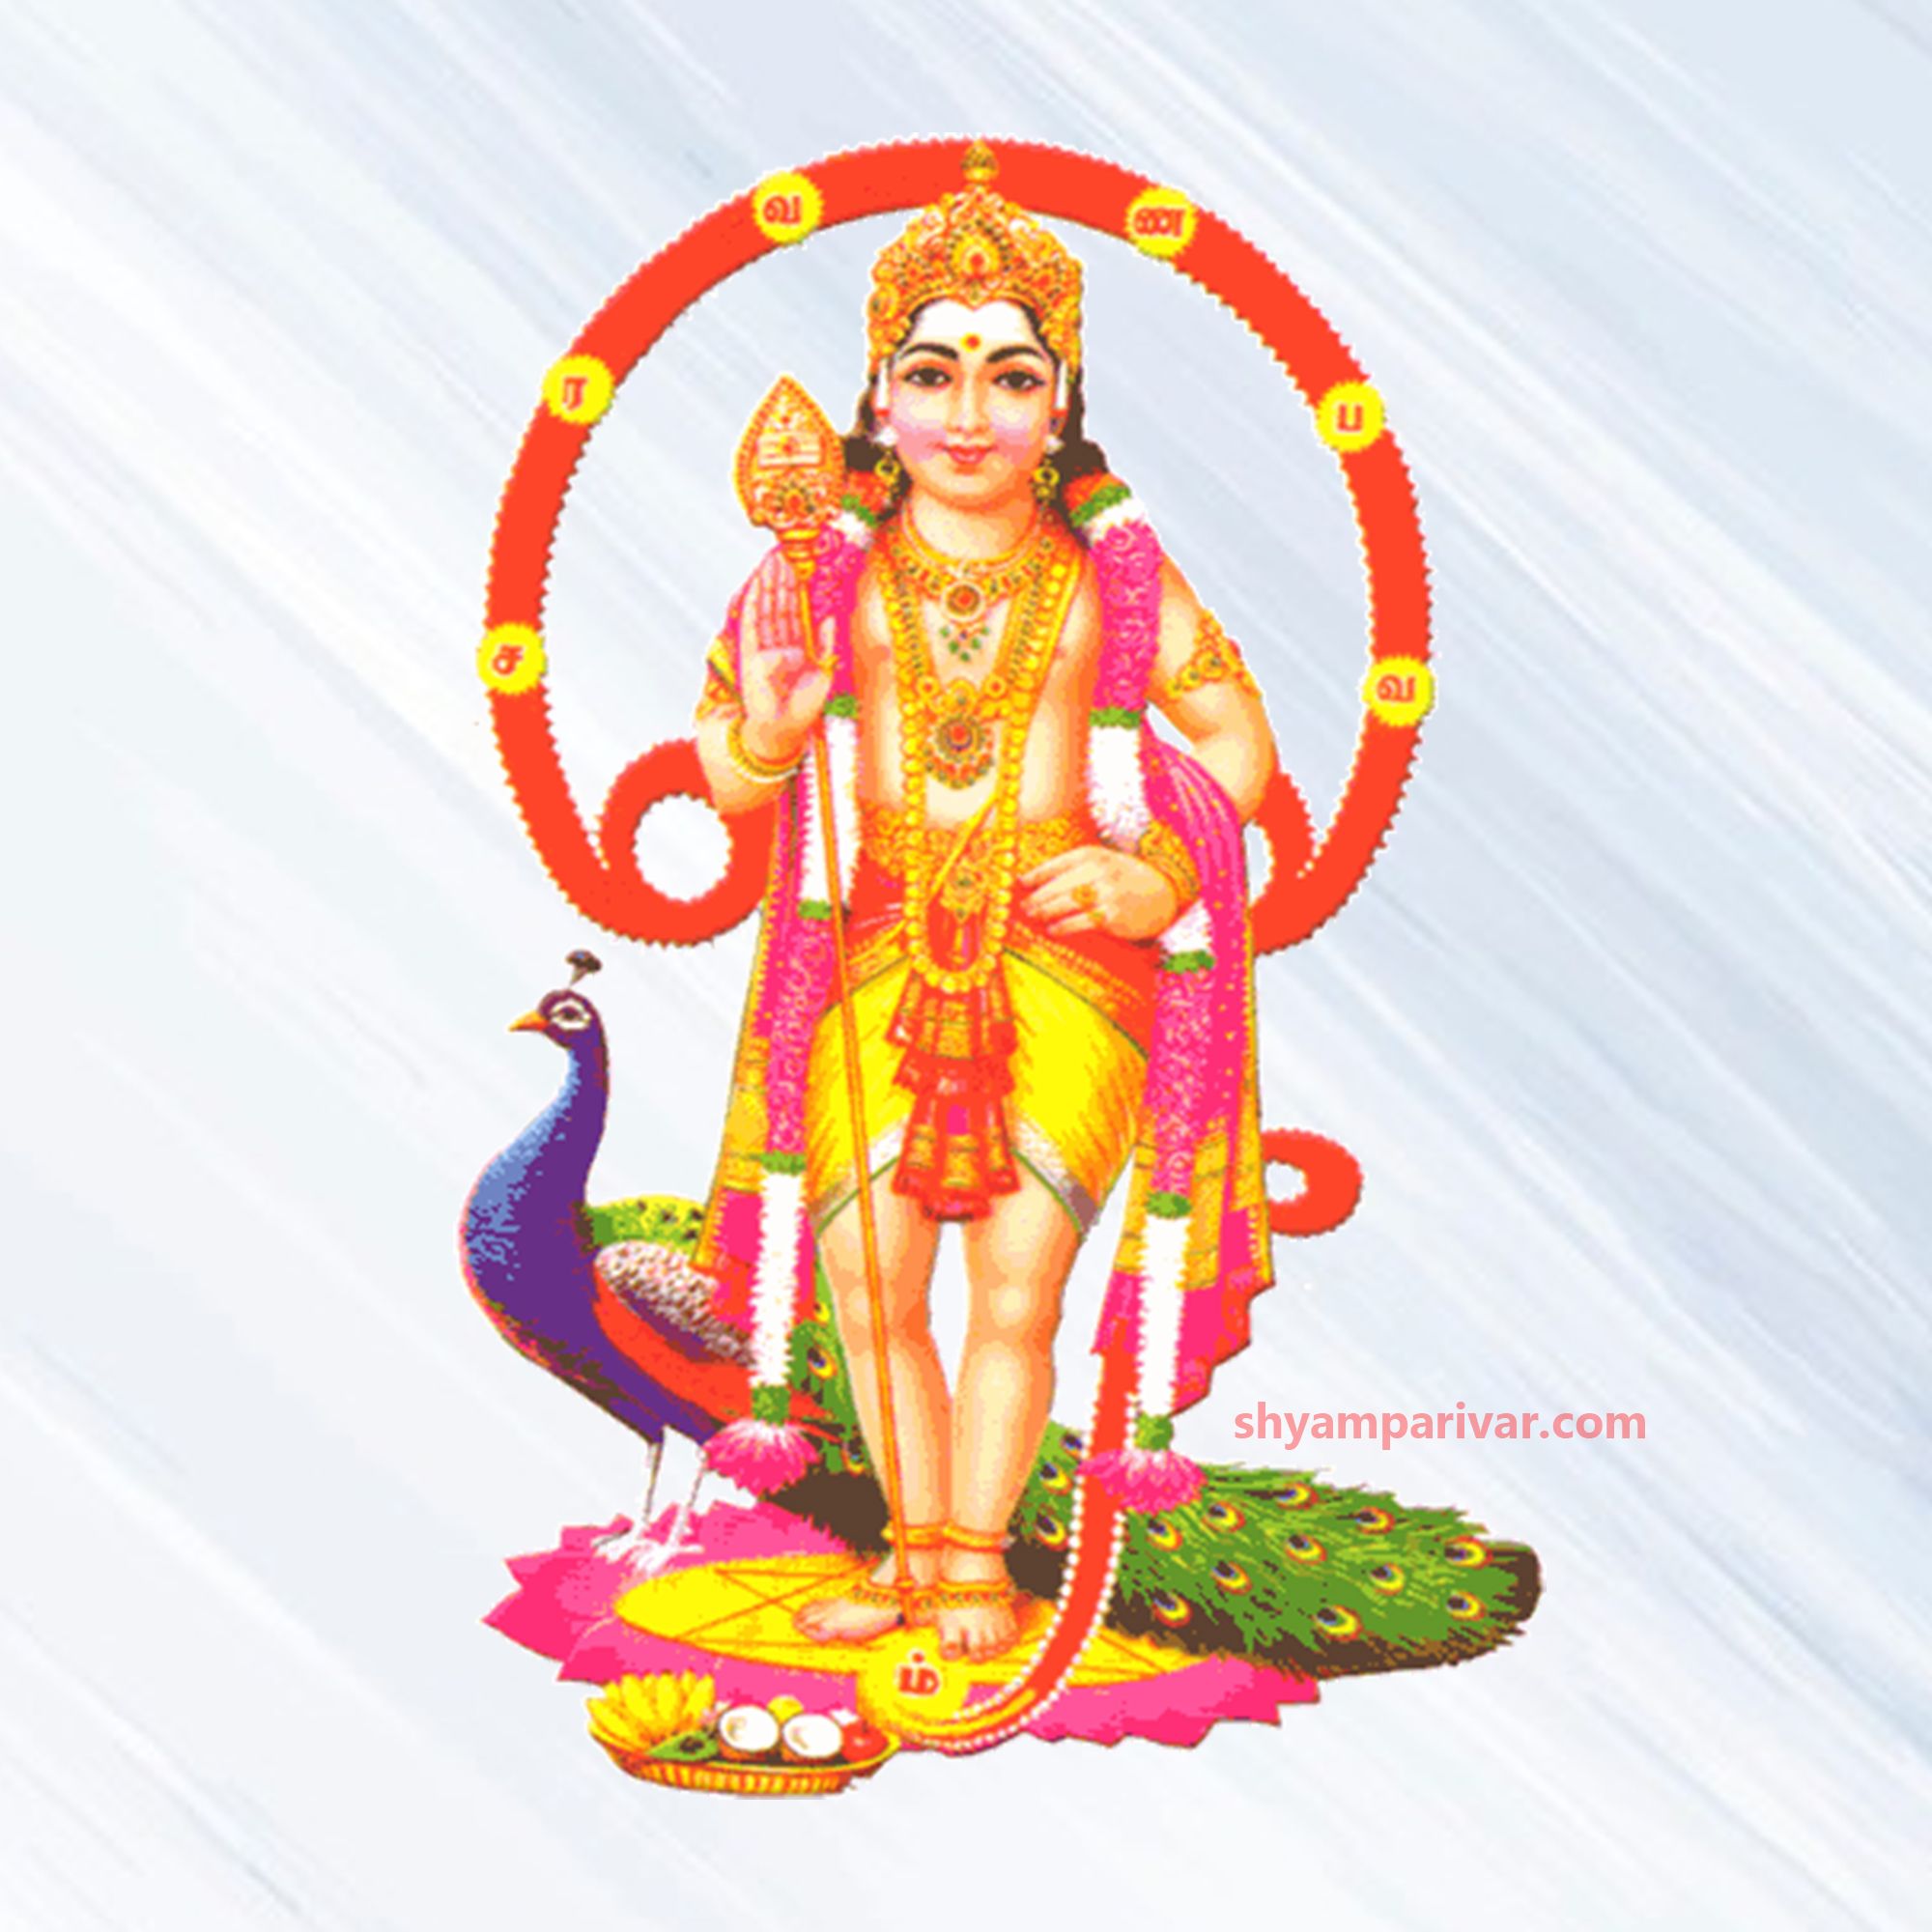 Lord murugan HD image wallpaper, picture, quotes, image